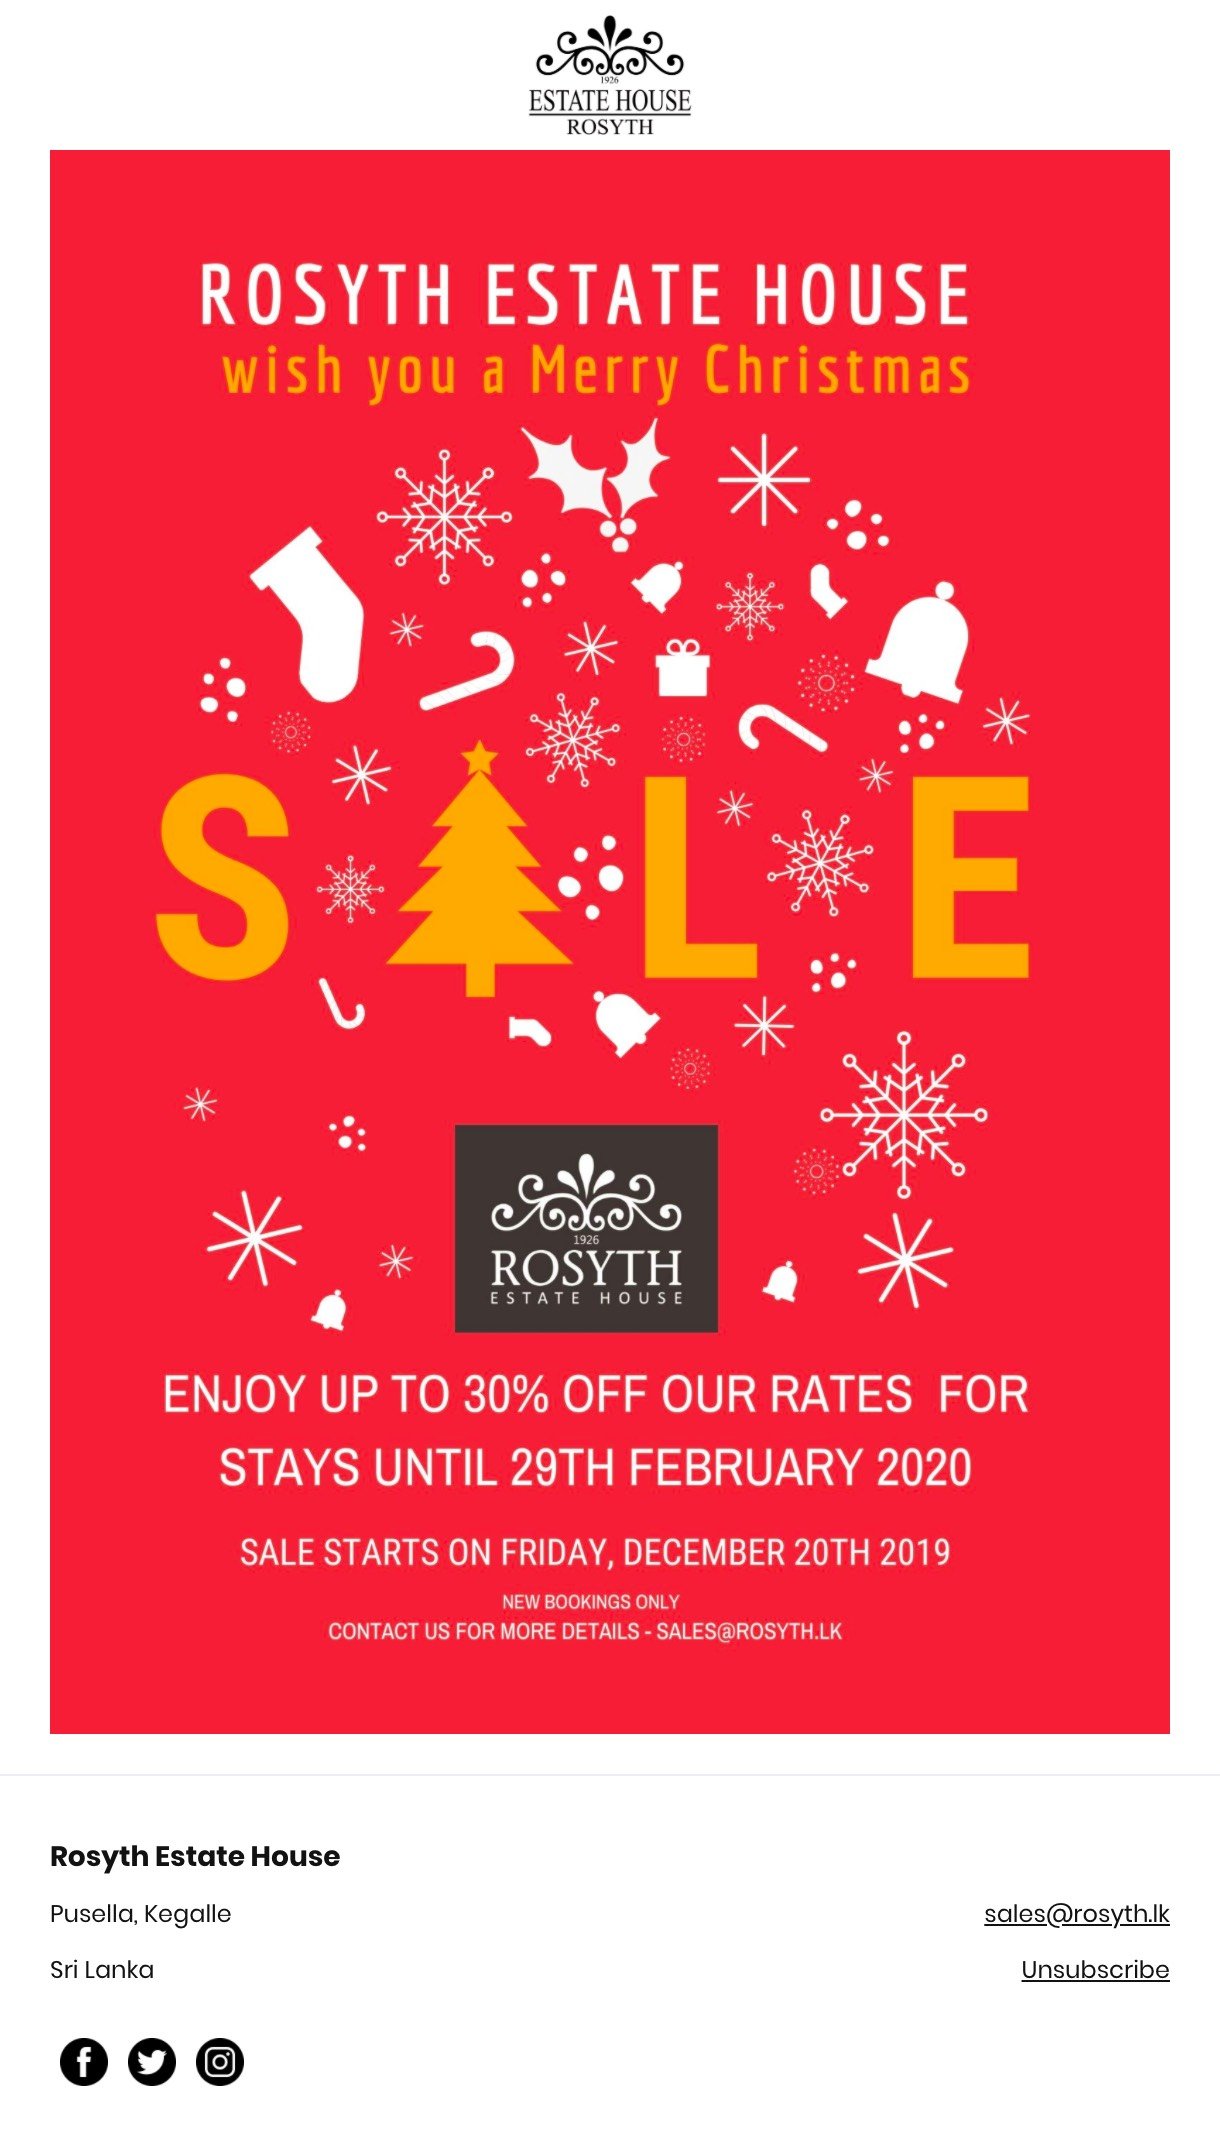 Rosyth Estate House Christmas newsletter example red background